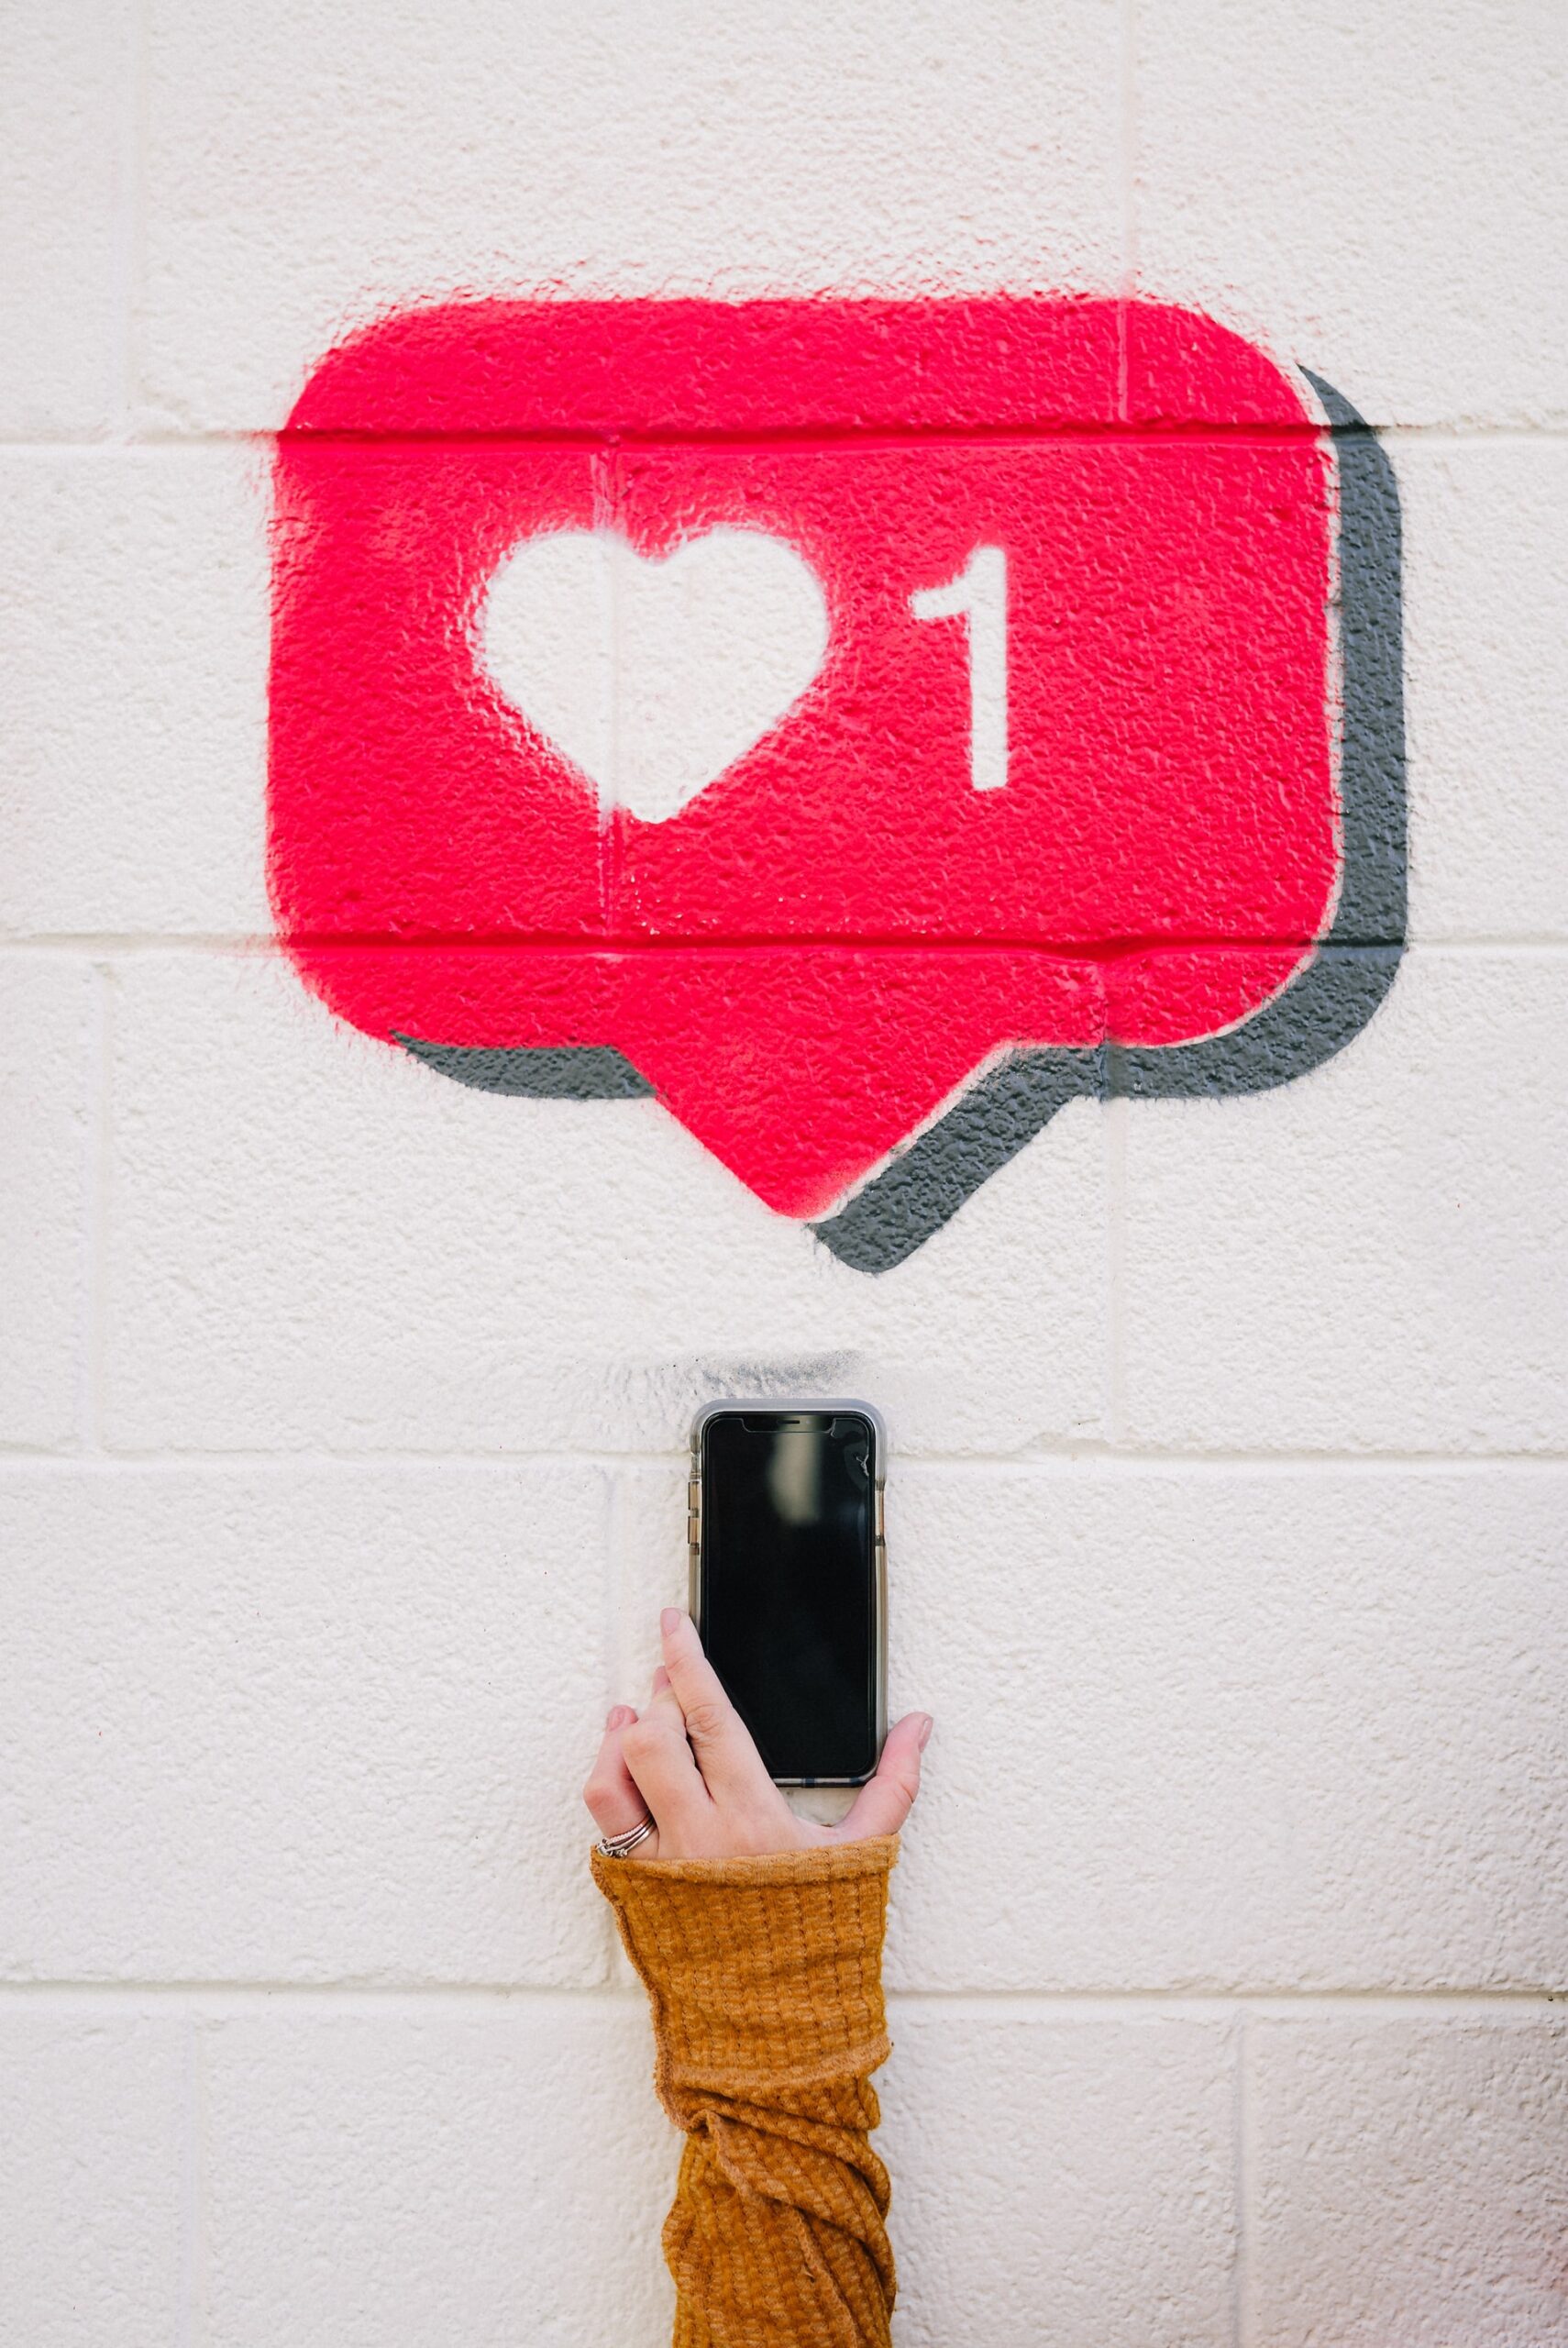 A hand holding a cell phone reaches up against a white brick wall towards a red speech bubble with a white heart and the number 1 inside it